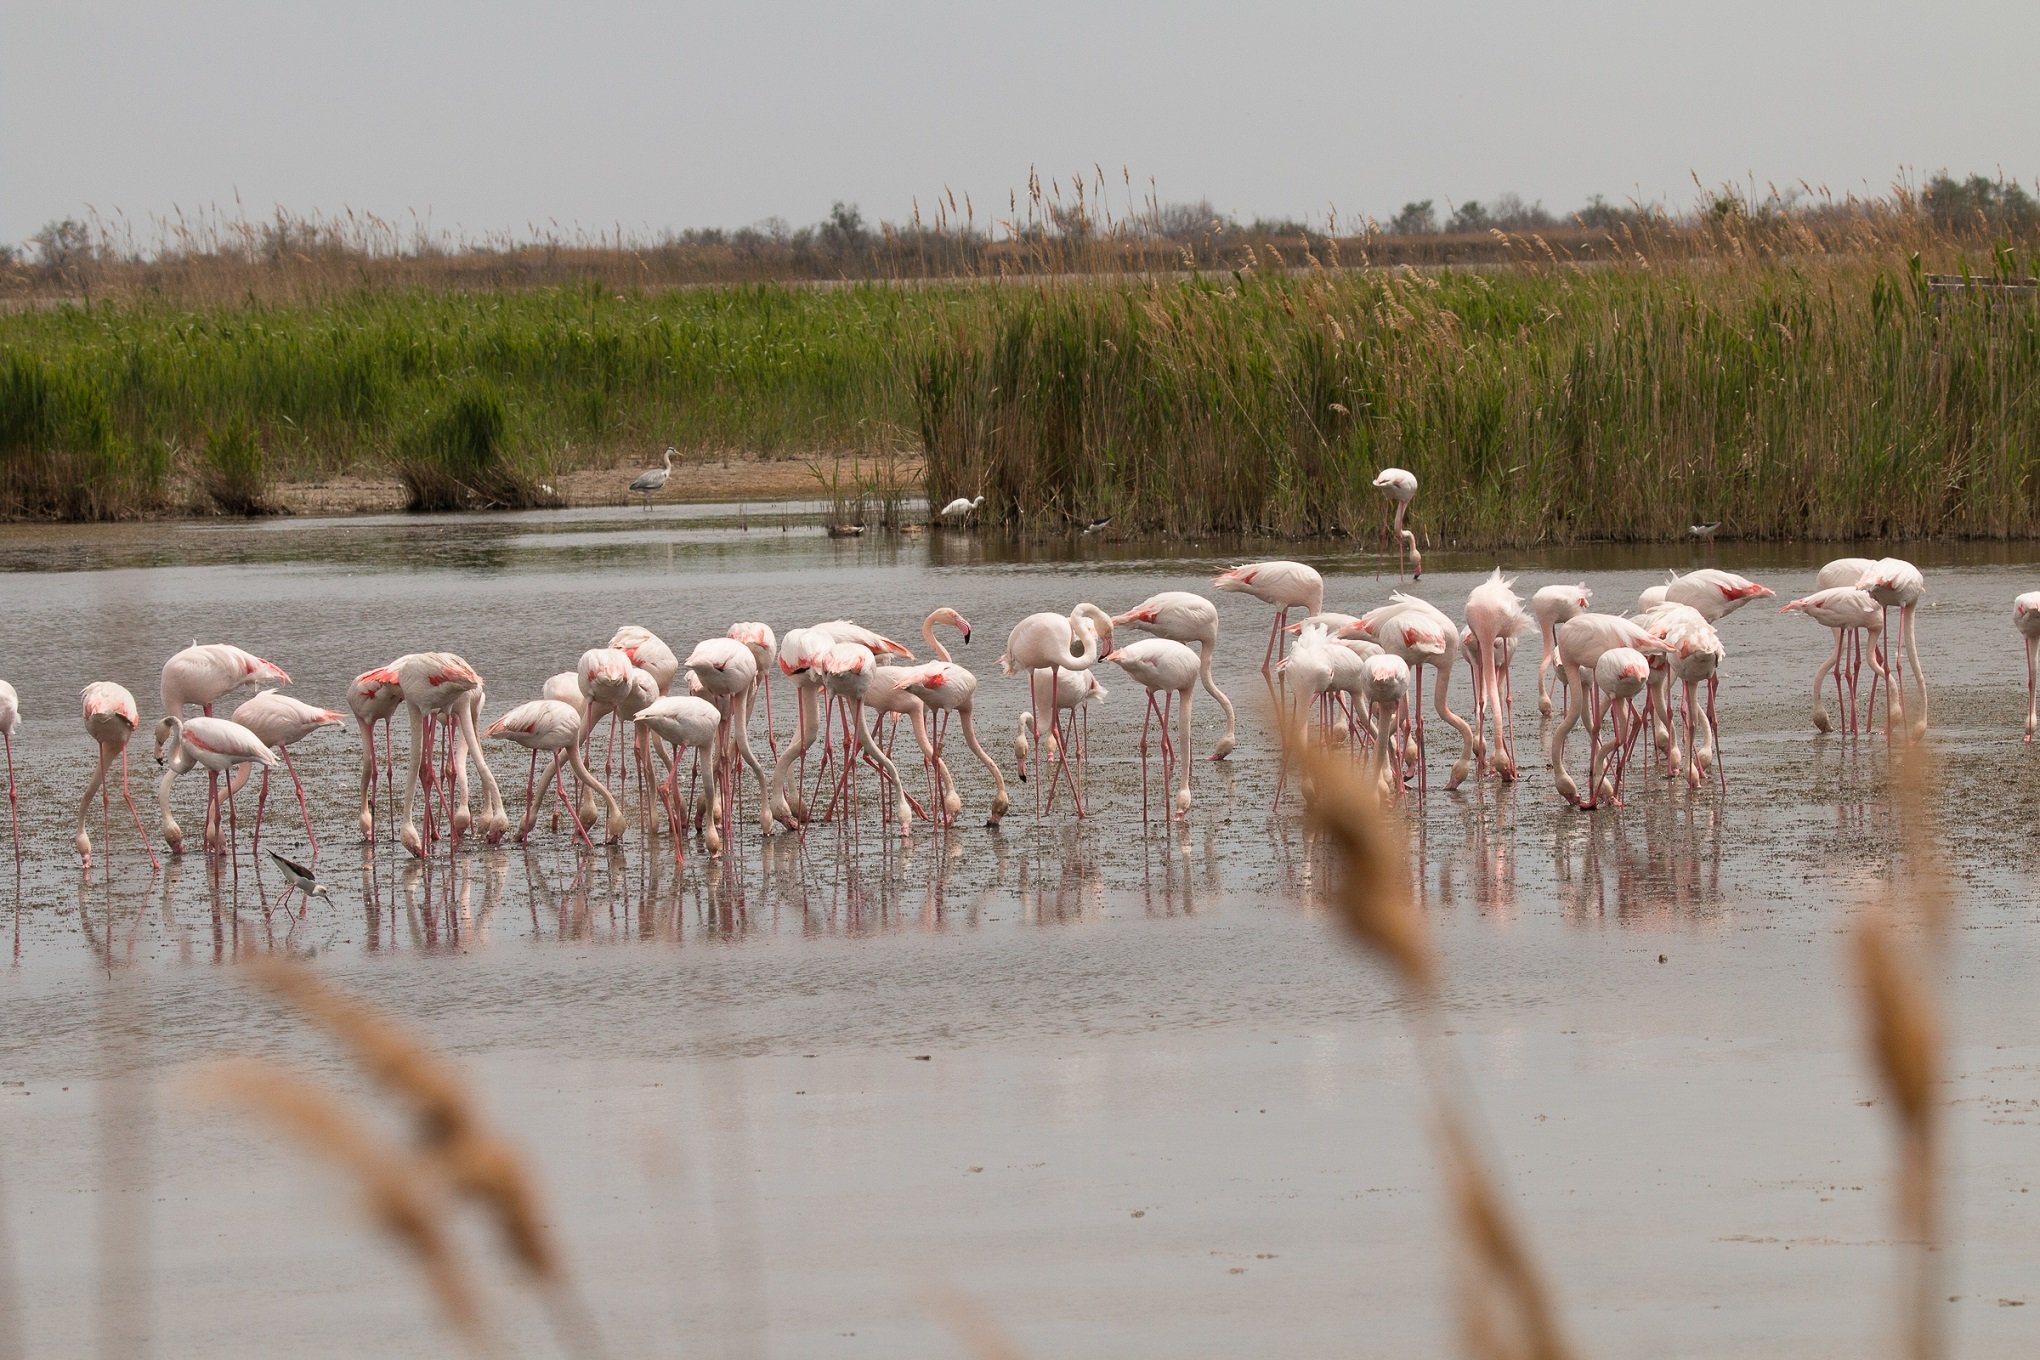 Satellite data can show environmental shifts in protected areas like the Camargue wetlands, where rising sea levels have a damaging impact.